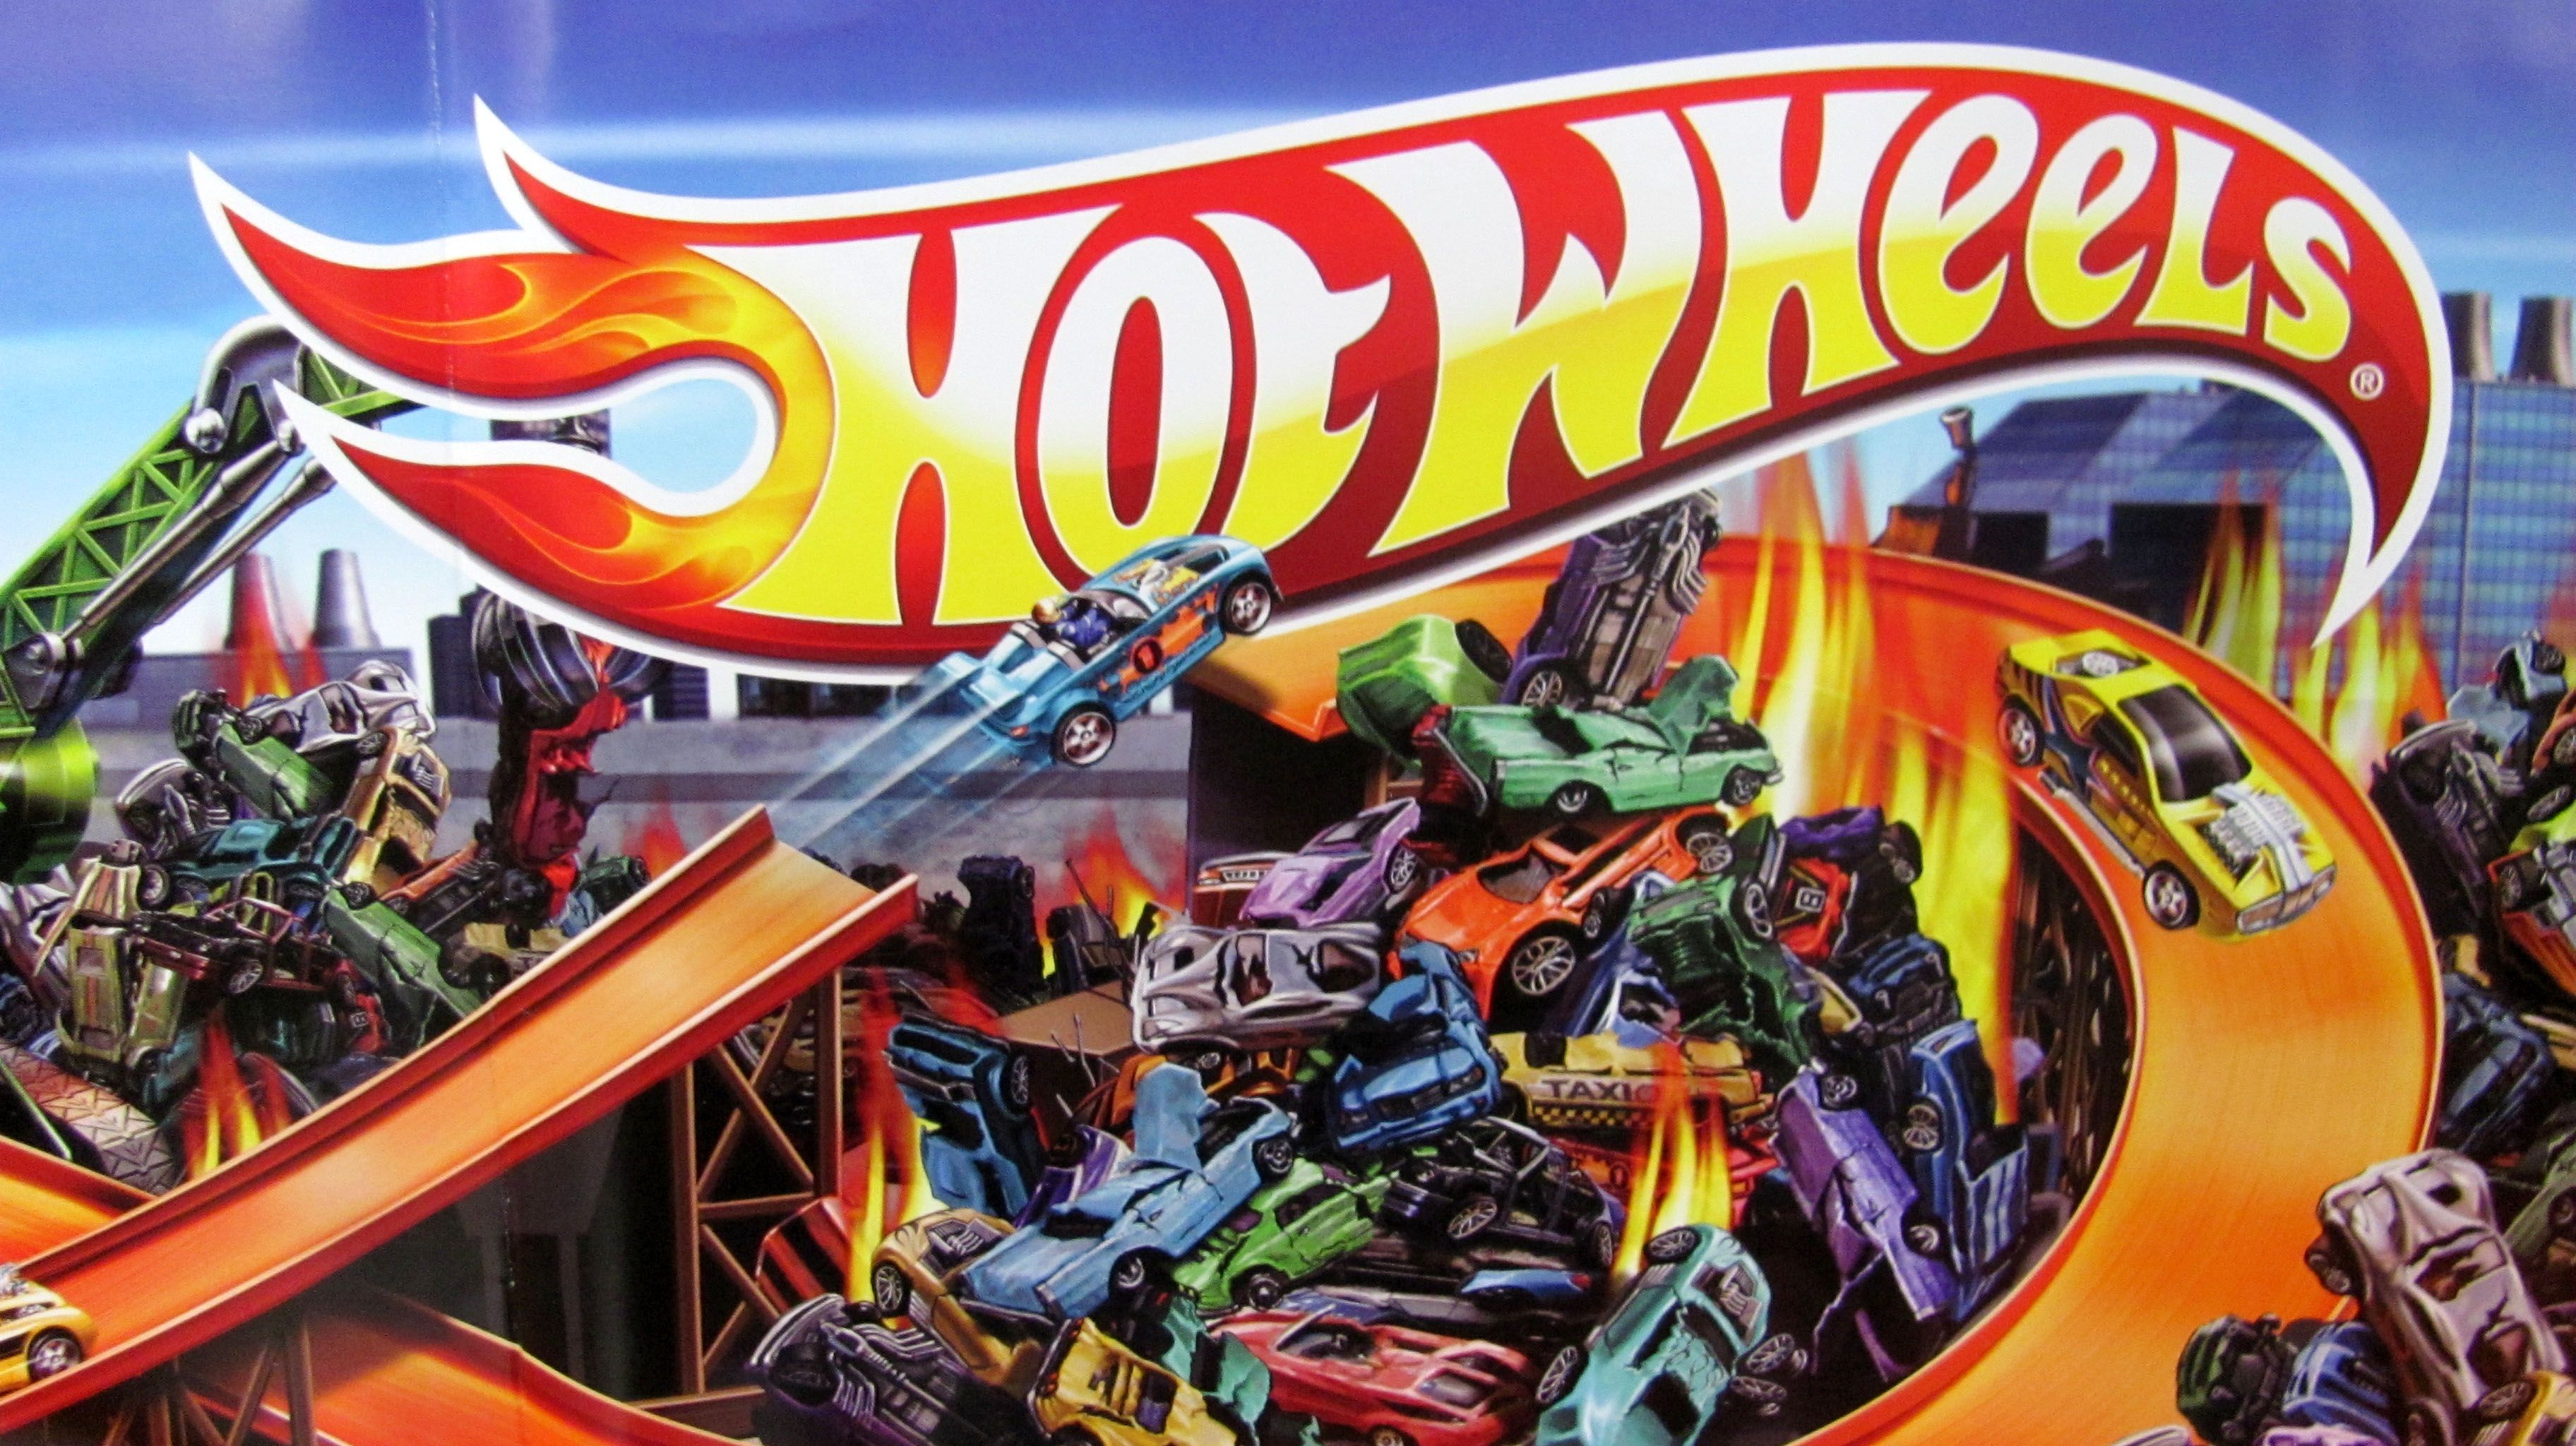 Little know facts about the coolest cars Wheels. Hot wheels, Cool cars, Hot wheels wall